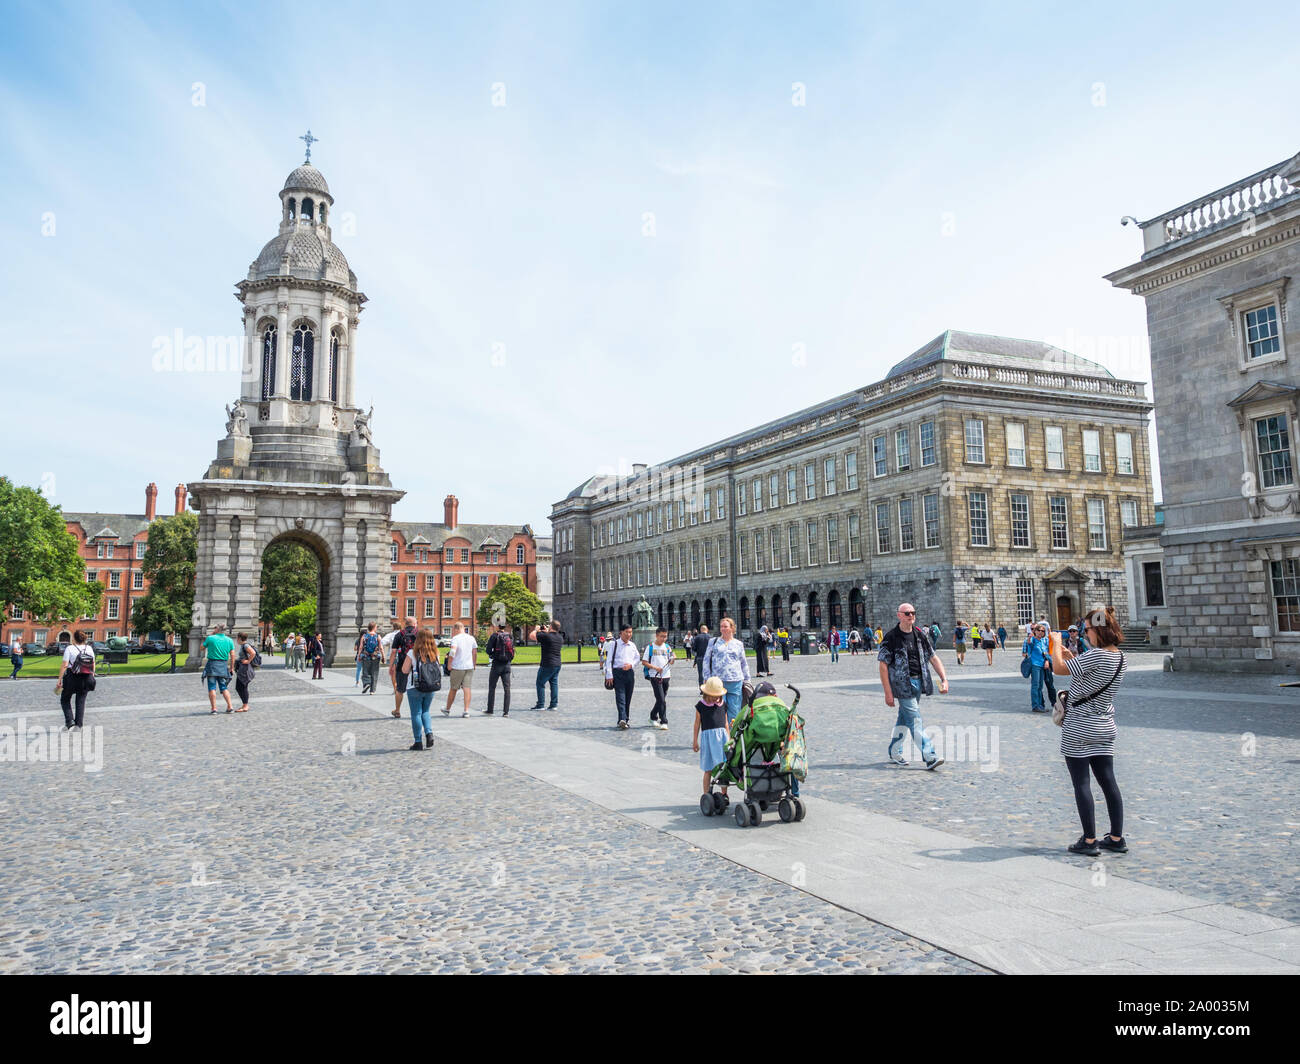 DUBLIN, IRELAND - AUGUST 2, 2019: Surrounded by central Dublin and located on College Green is Trinity College Dublin, Ireland. Stock Photo